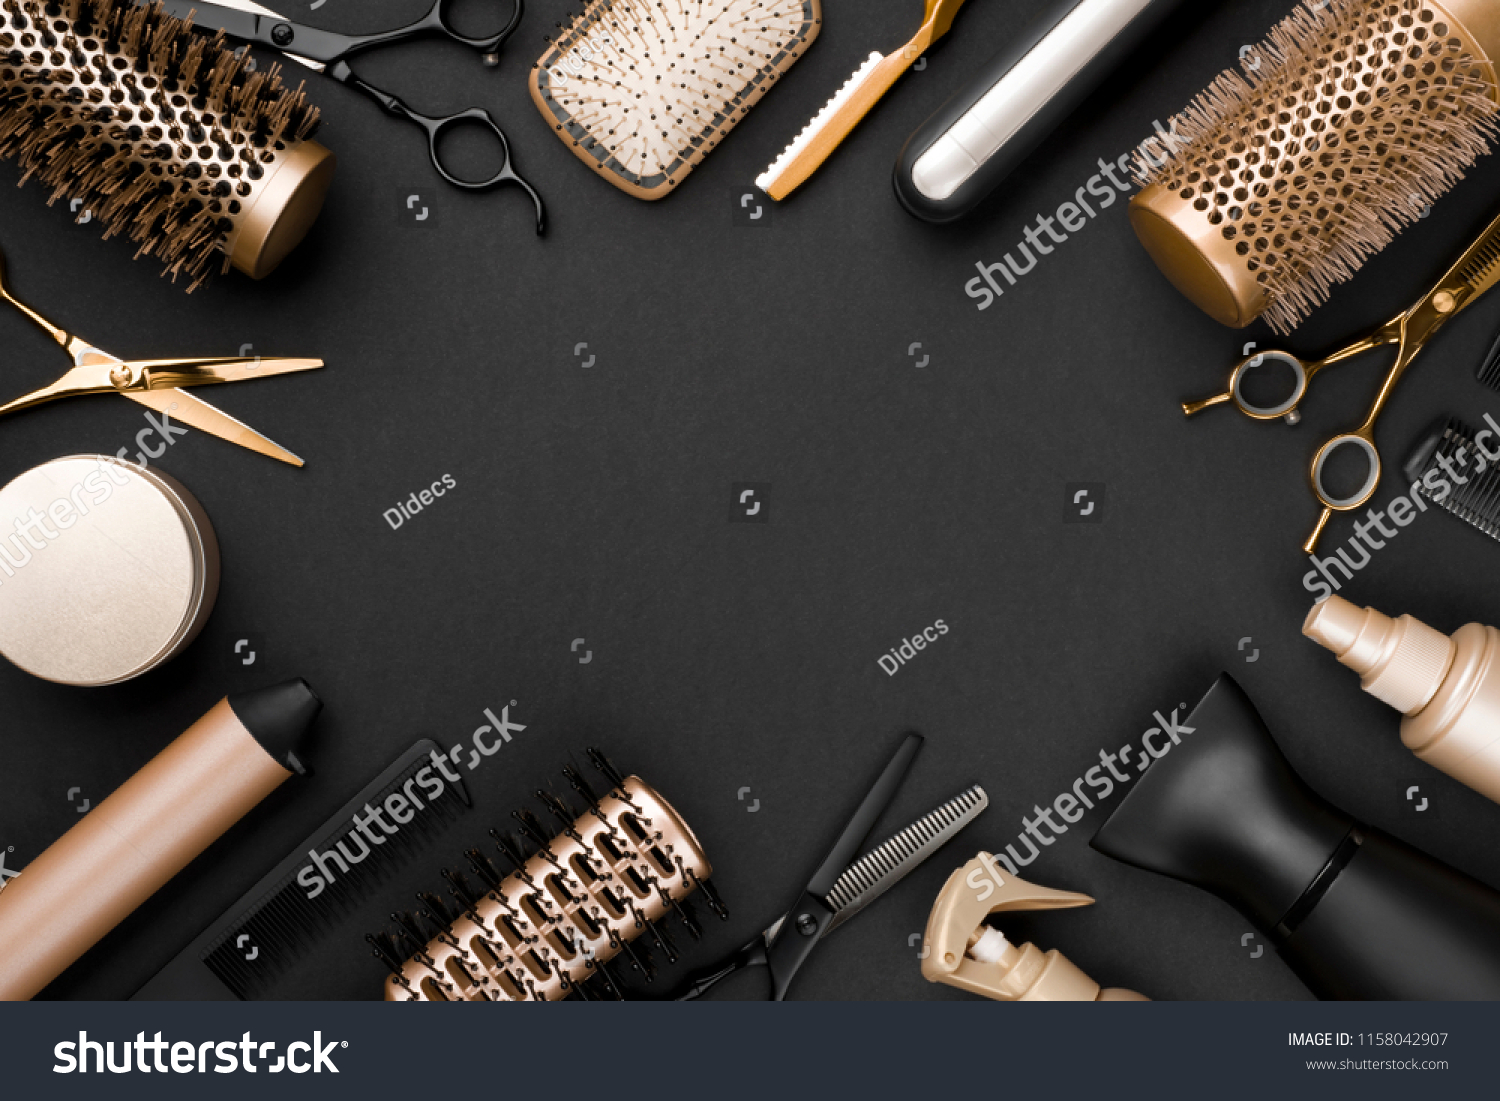 Hairdresser tools on black background with copy space in center